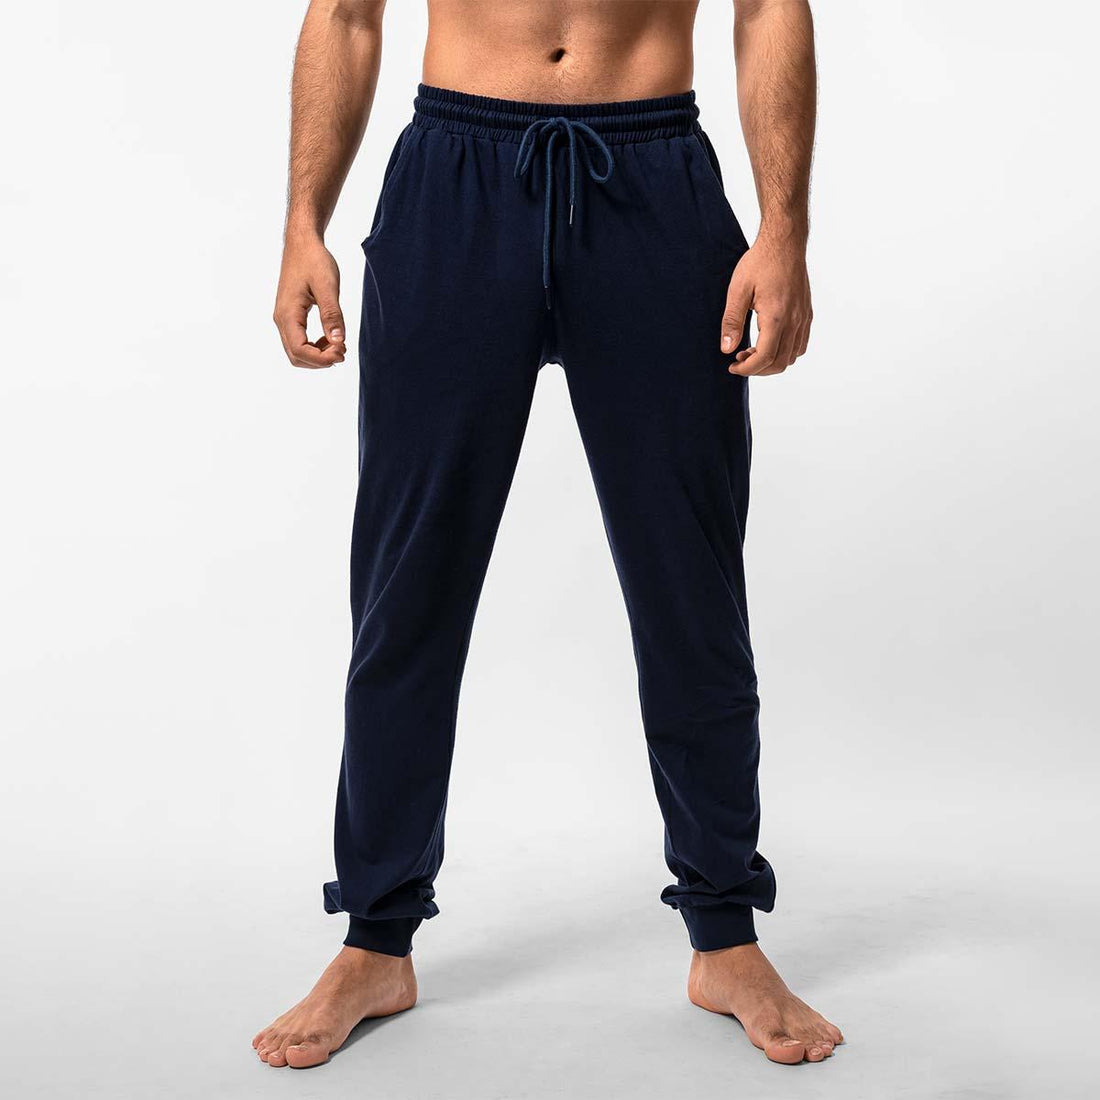 Activewear Tracks and Joggers for Men | Baller Athletik